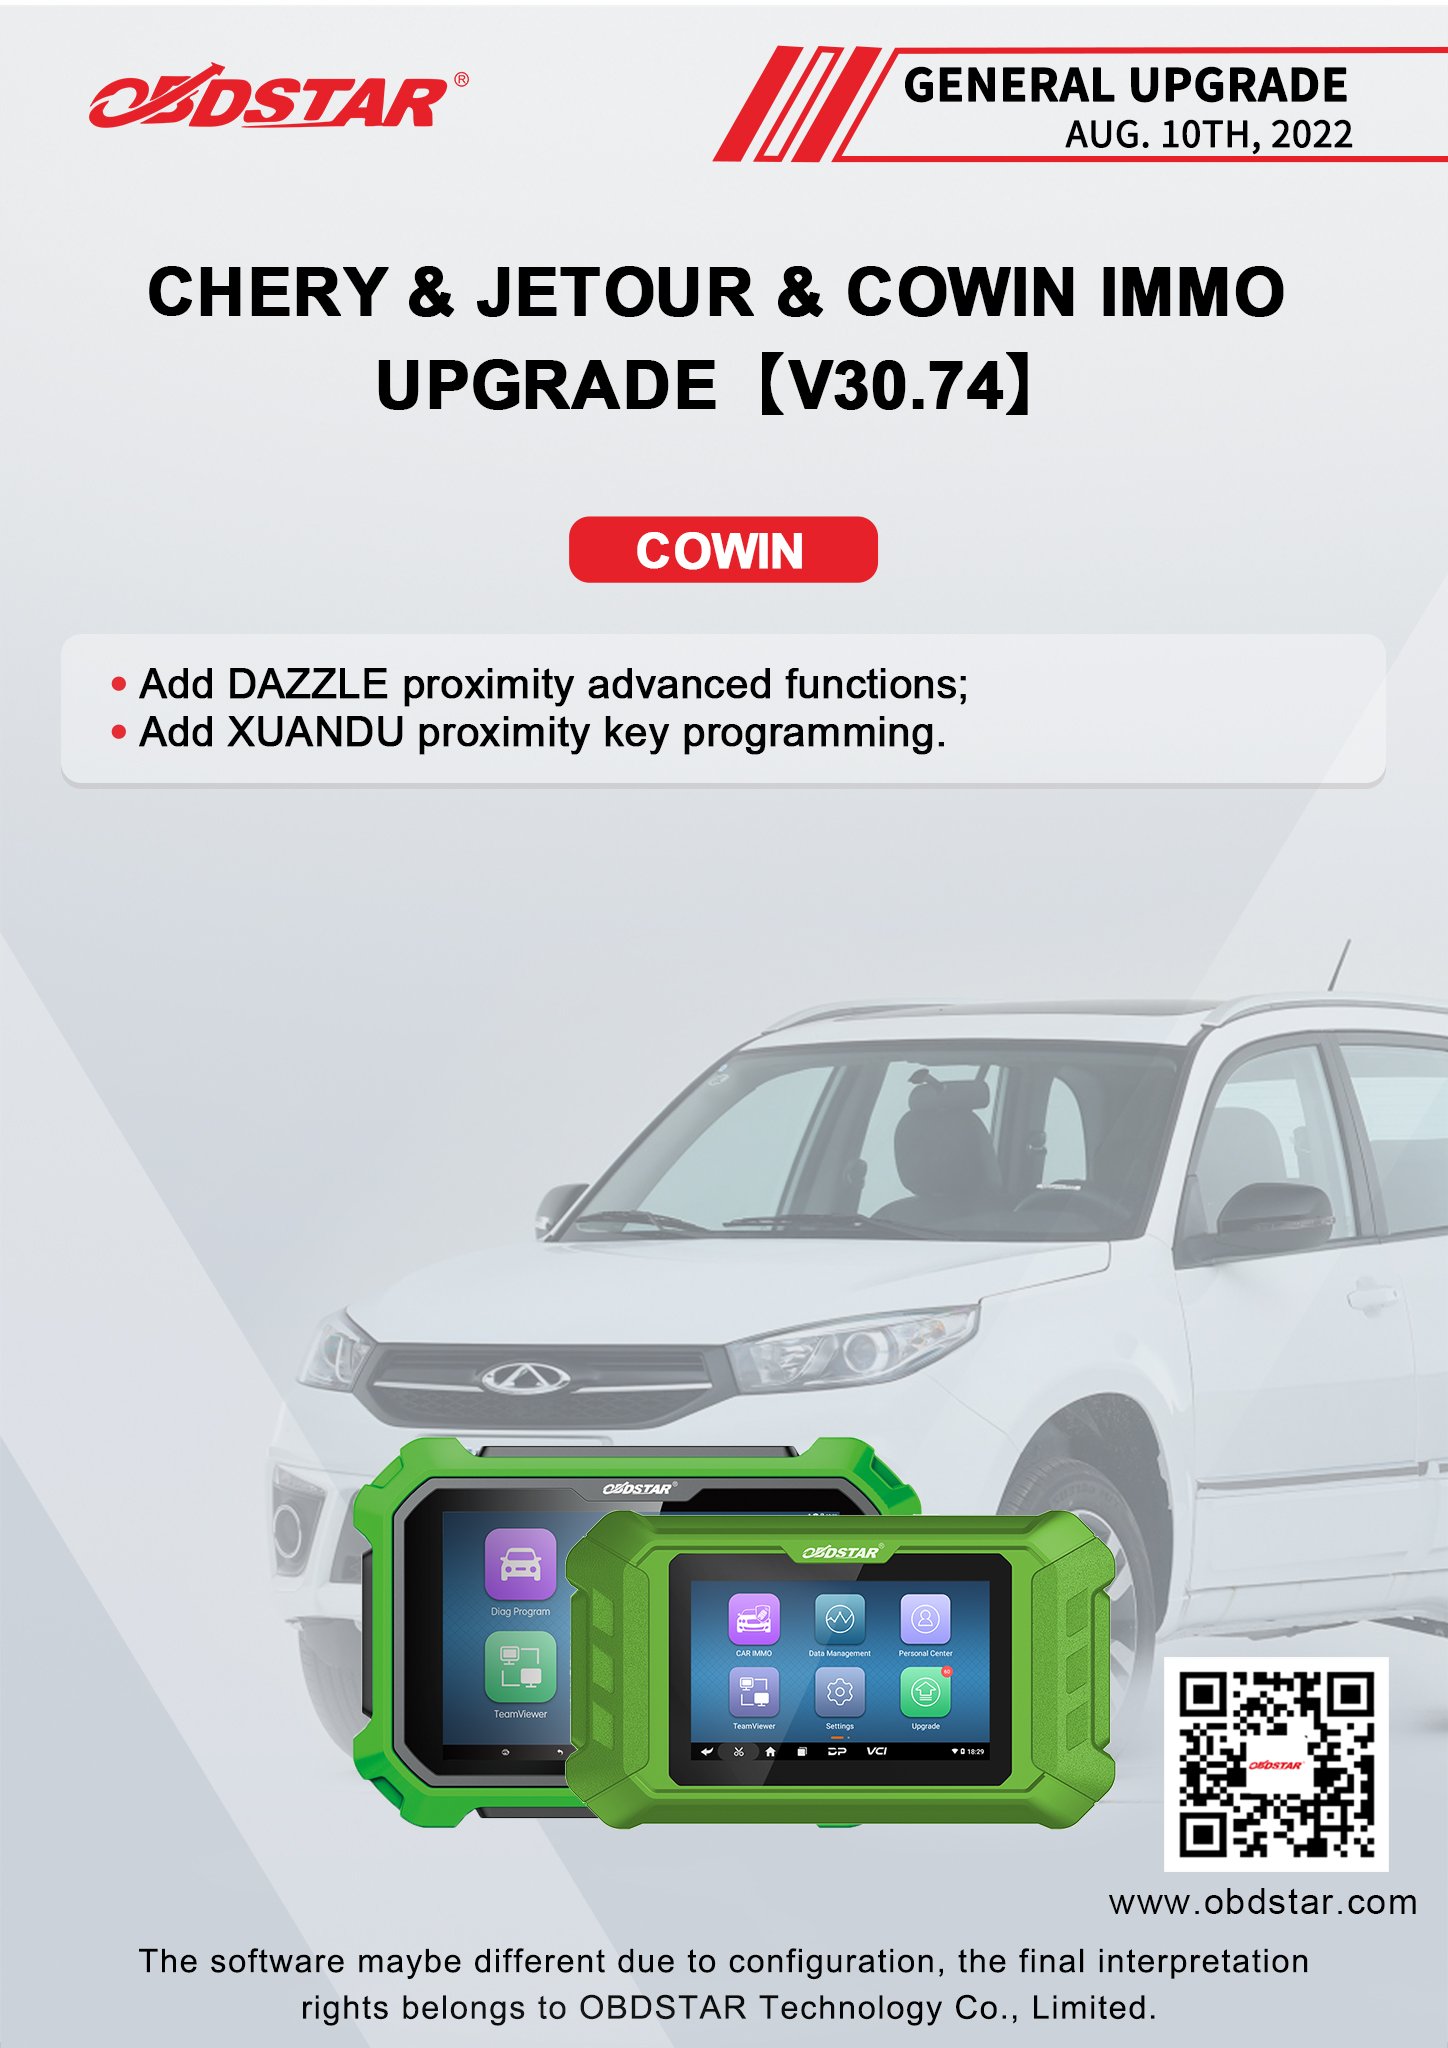 CHERY & JETOUR & COWIN V30.74 IMMO Upgrade on OBDSTAR X300 DP Plus and X300 DP and X300 Pro4